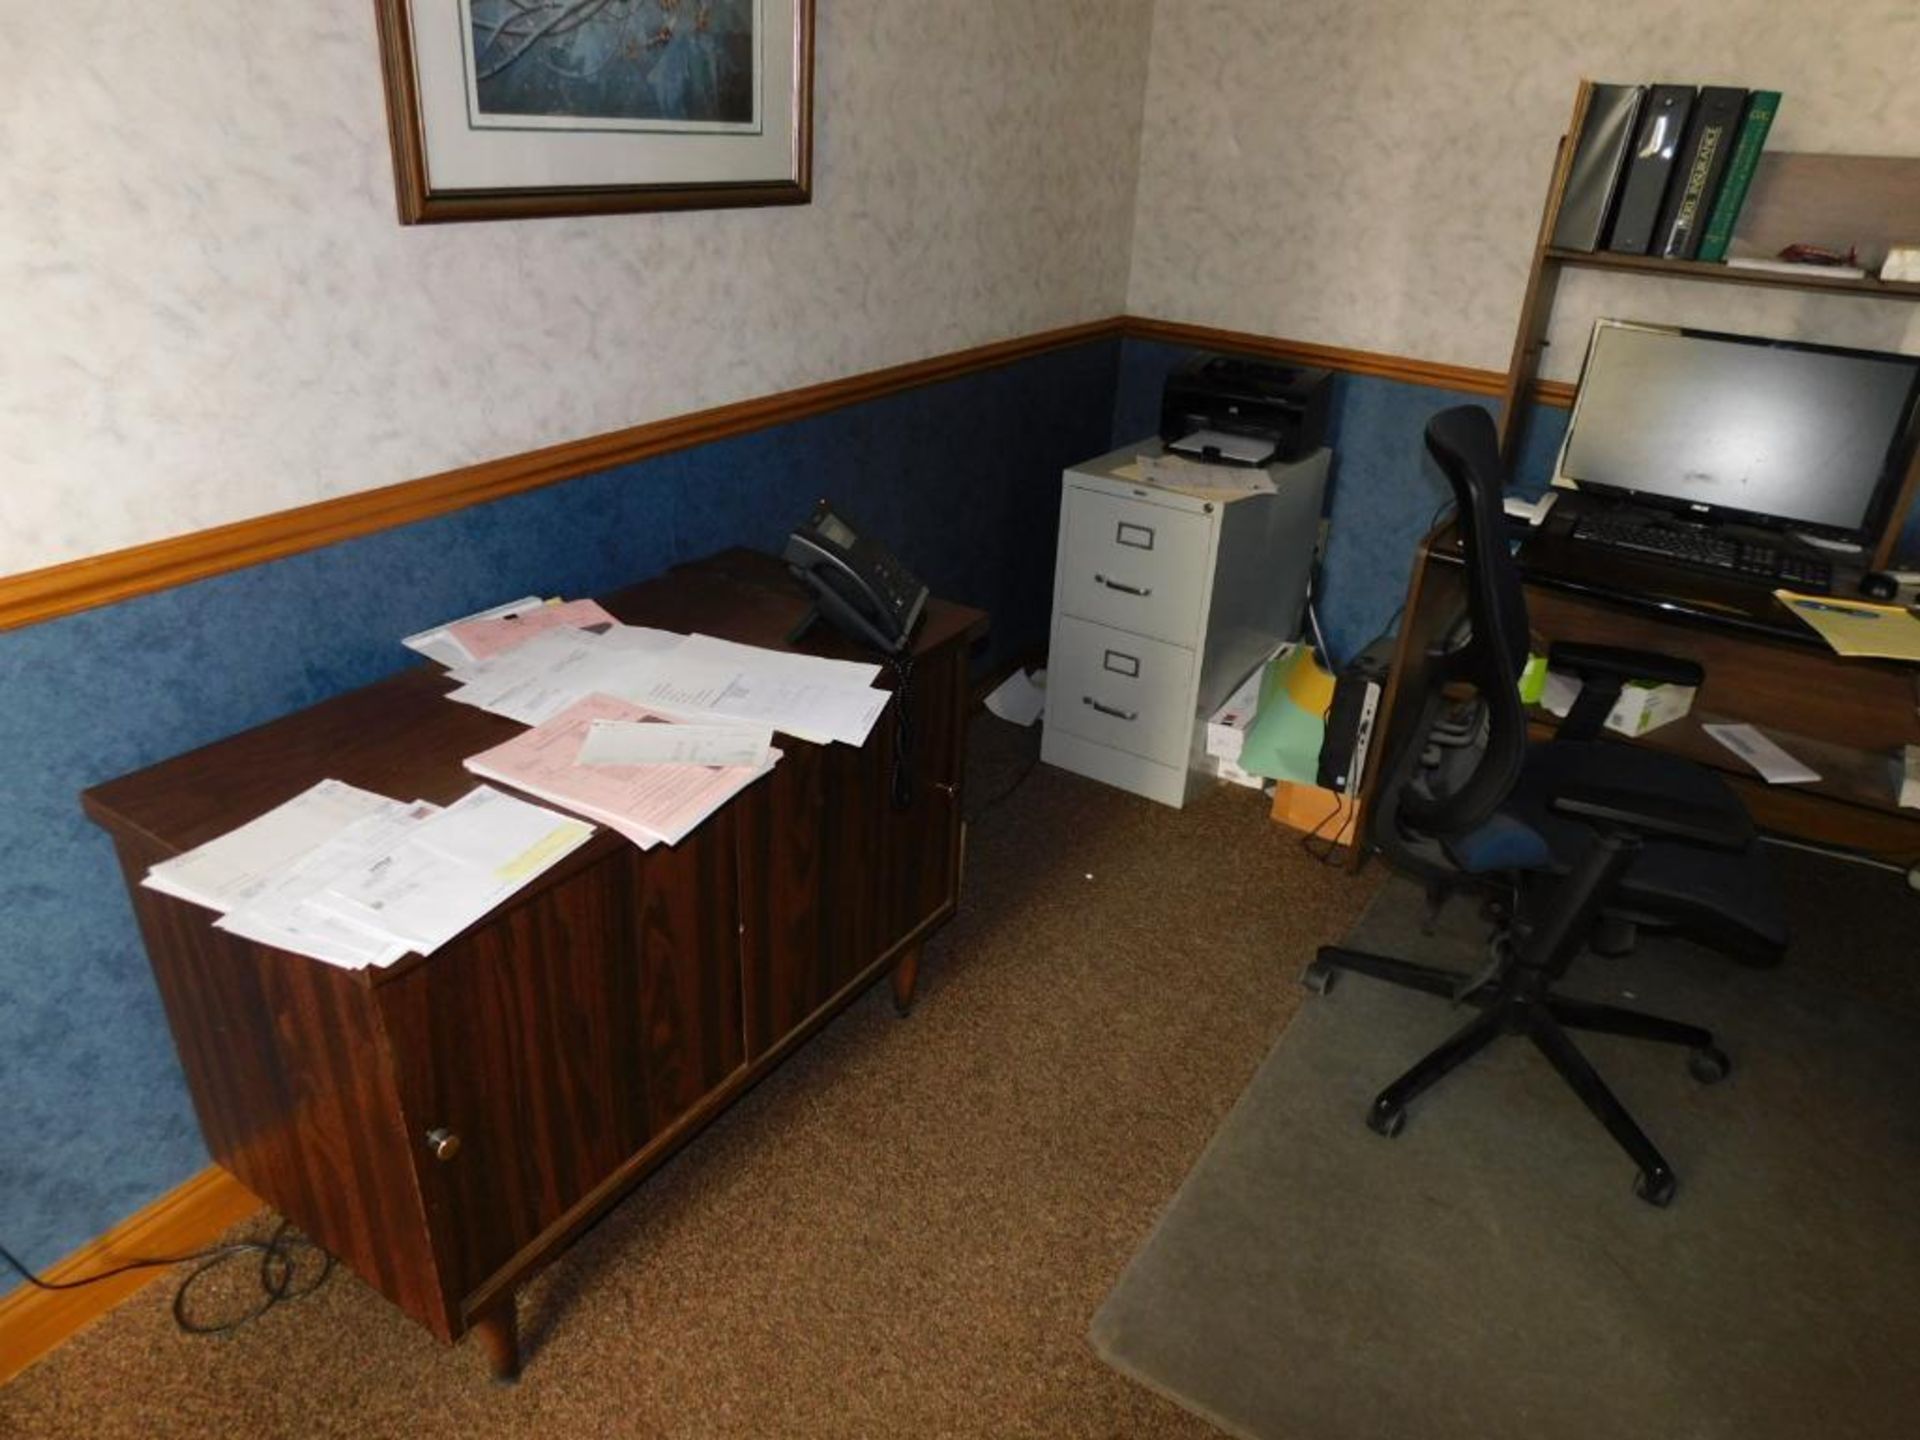 LOT: Contents of Main Office (NO ART, NO ELECTRONICS, NOTHING ATTACHED TO WALLS) - Image 27 of 27